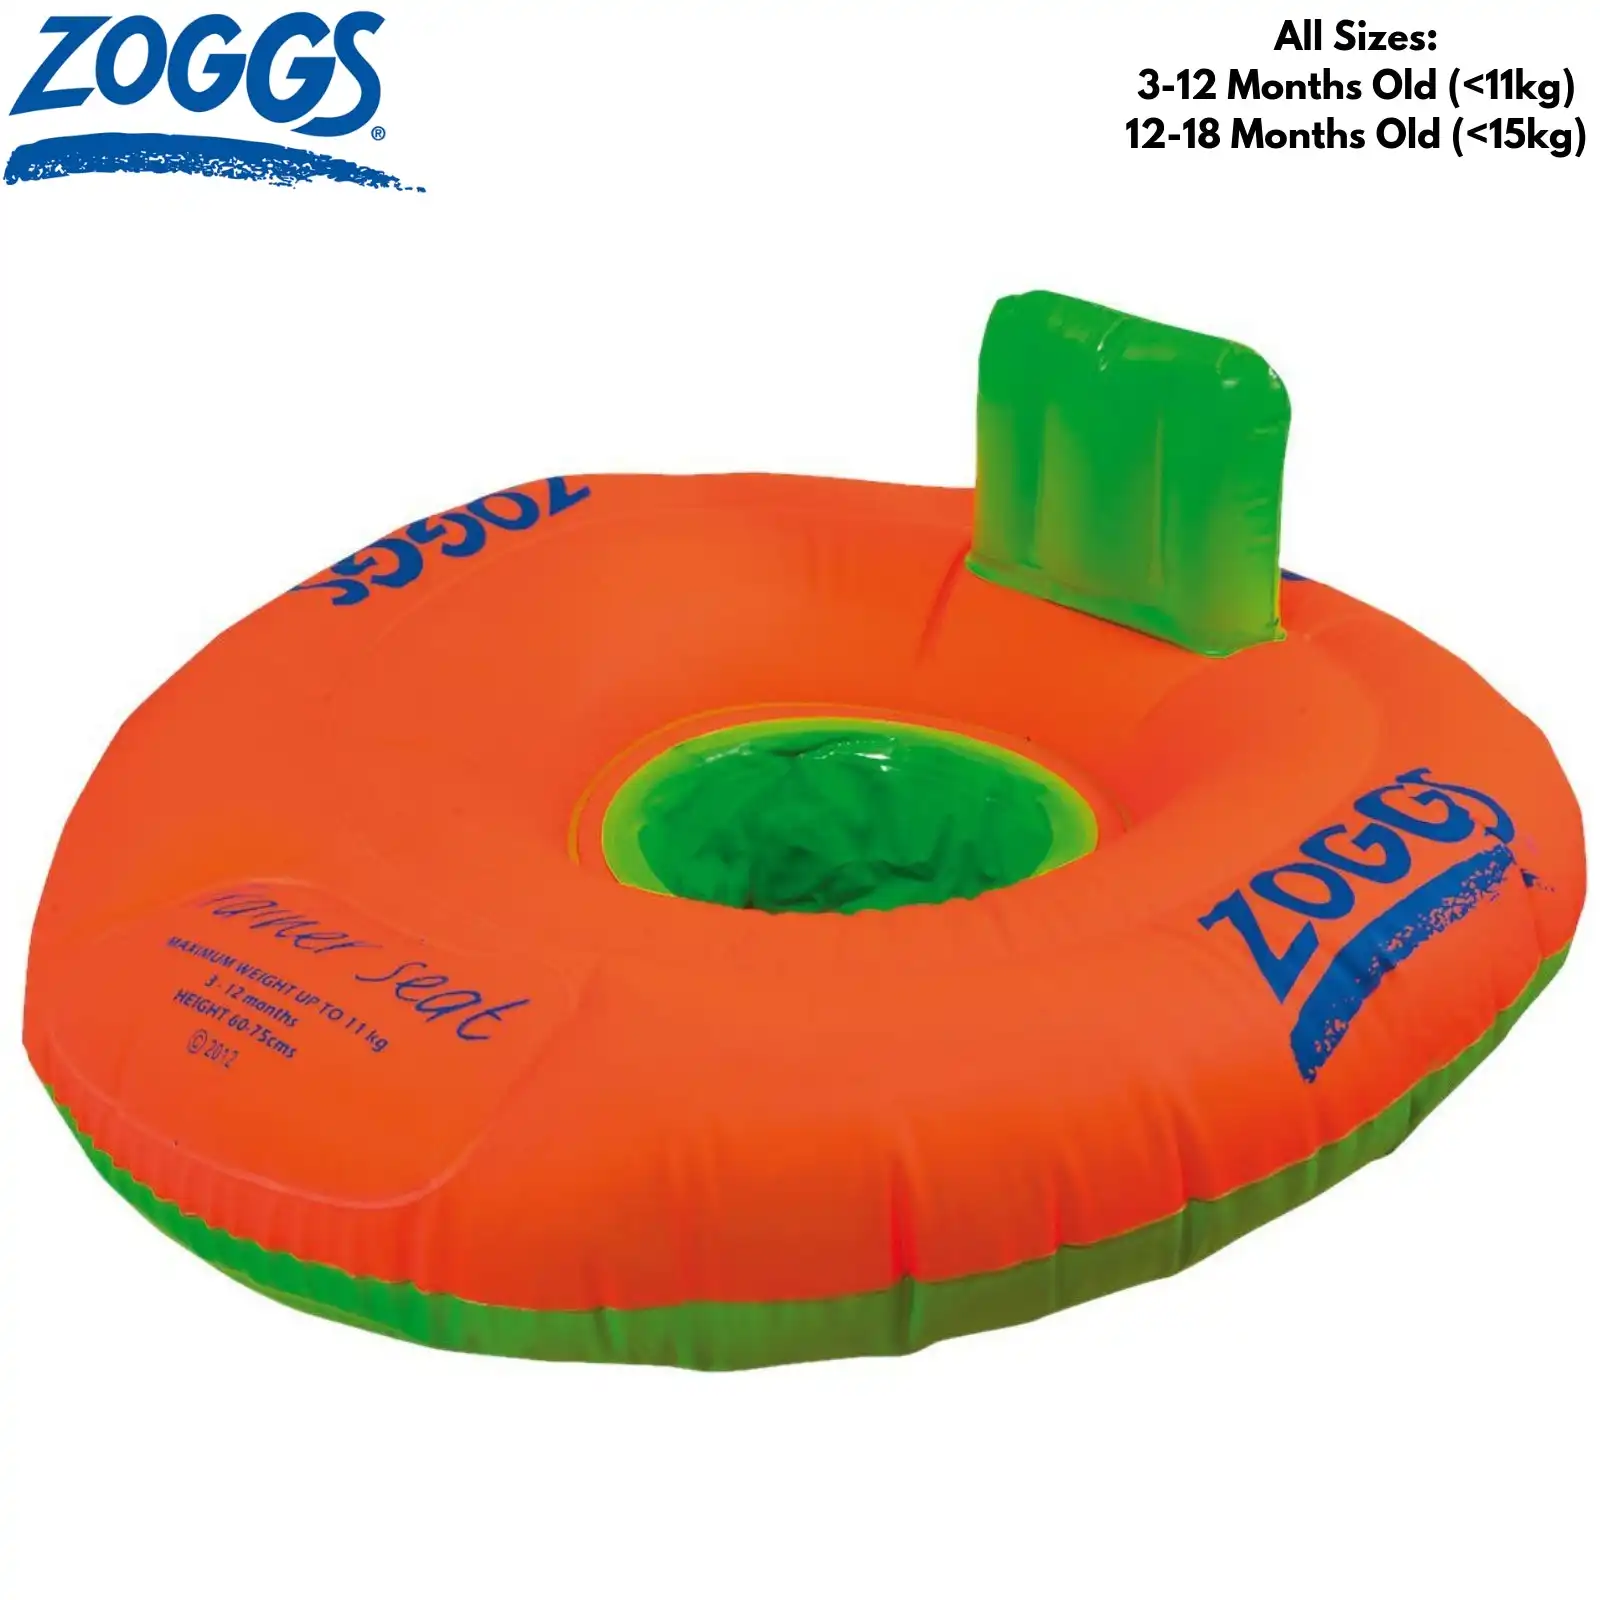 Zoggs Stage 1 Trainer Seat Children's Swimming Floatie Zoggy Kids Learn Training Inflatable